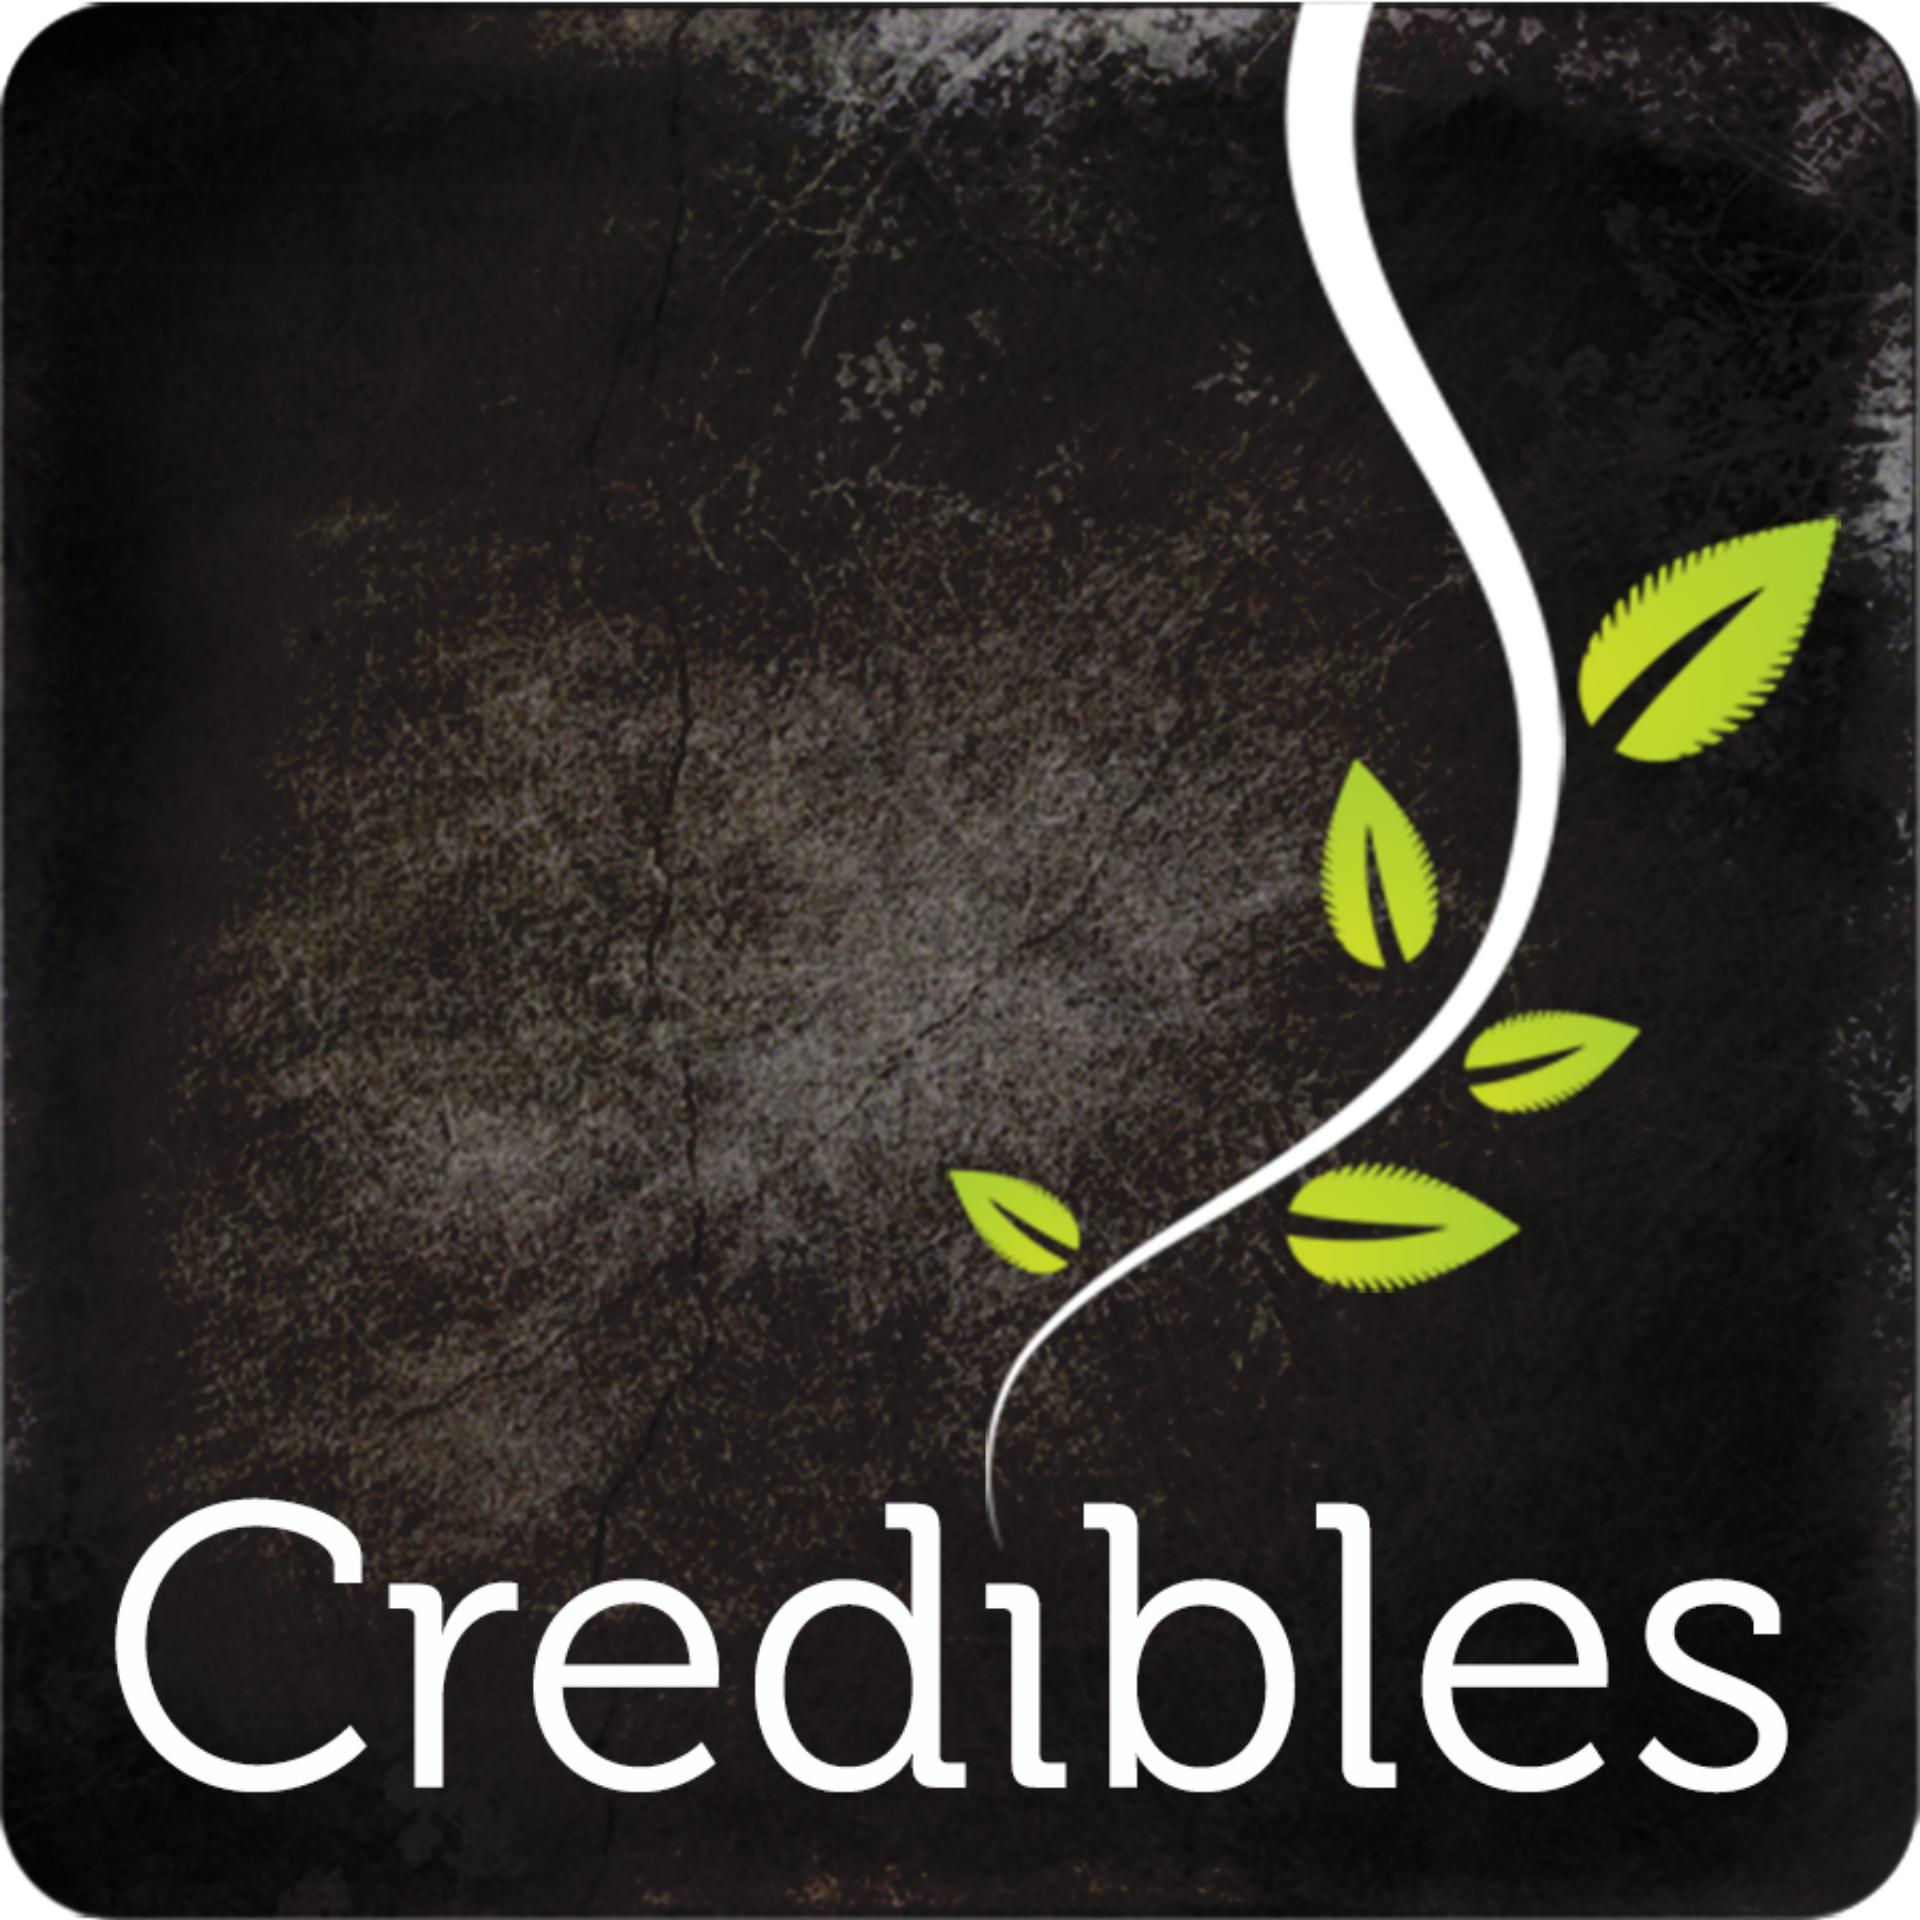 Credibles helps customers fund their favorite food businesses.